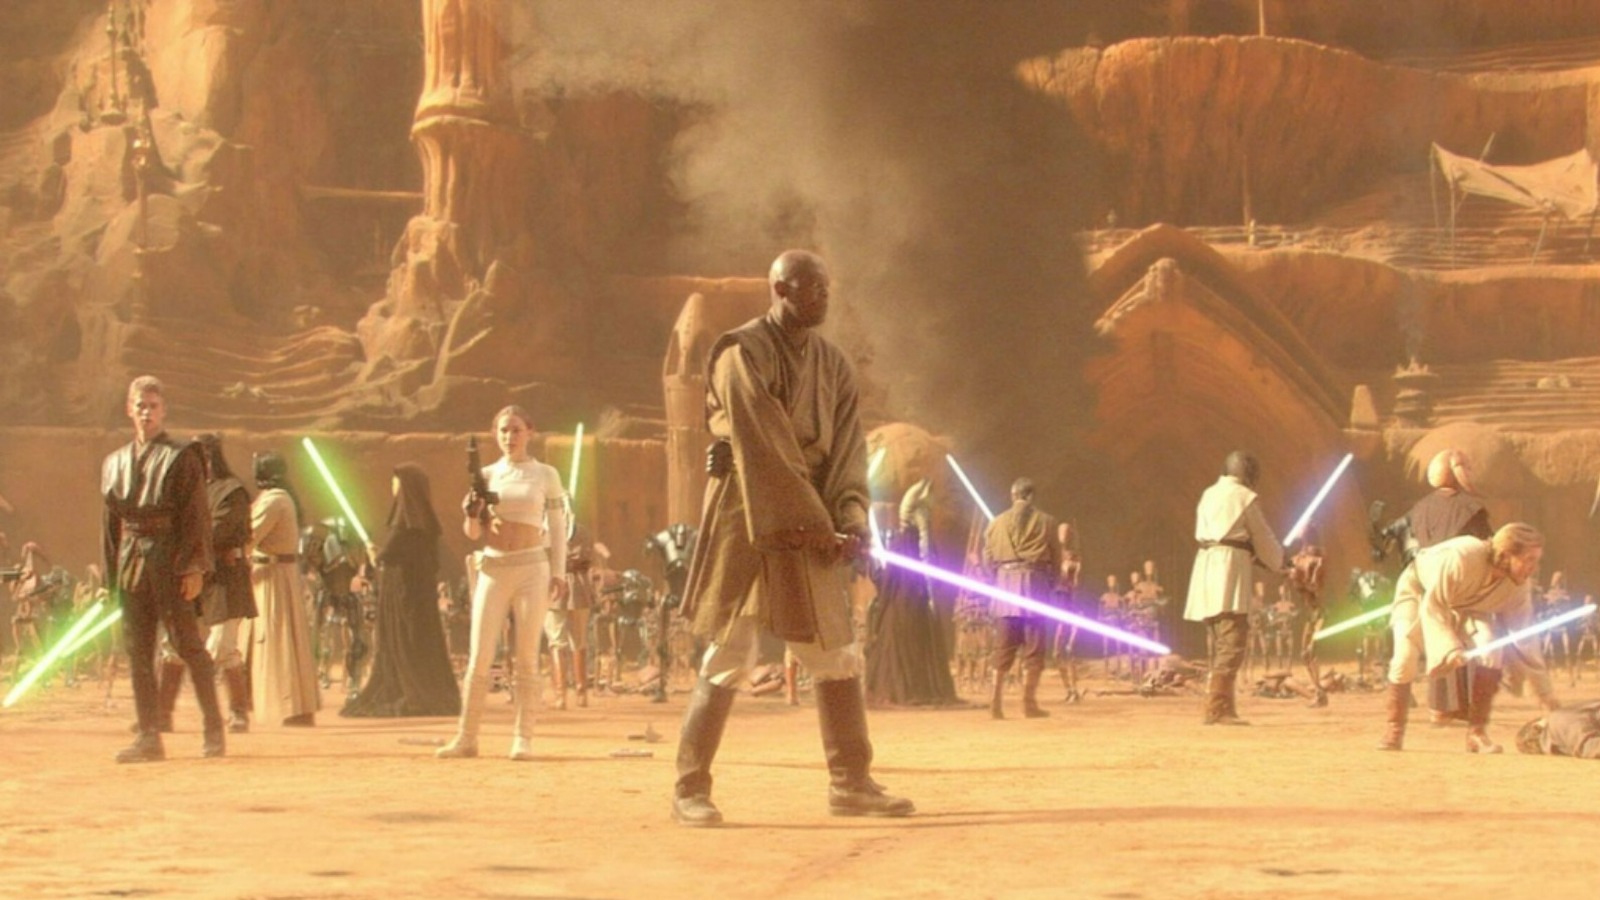 star wars attack of the clones battle of geonosis